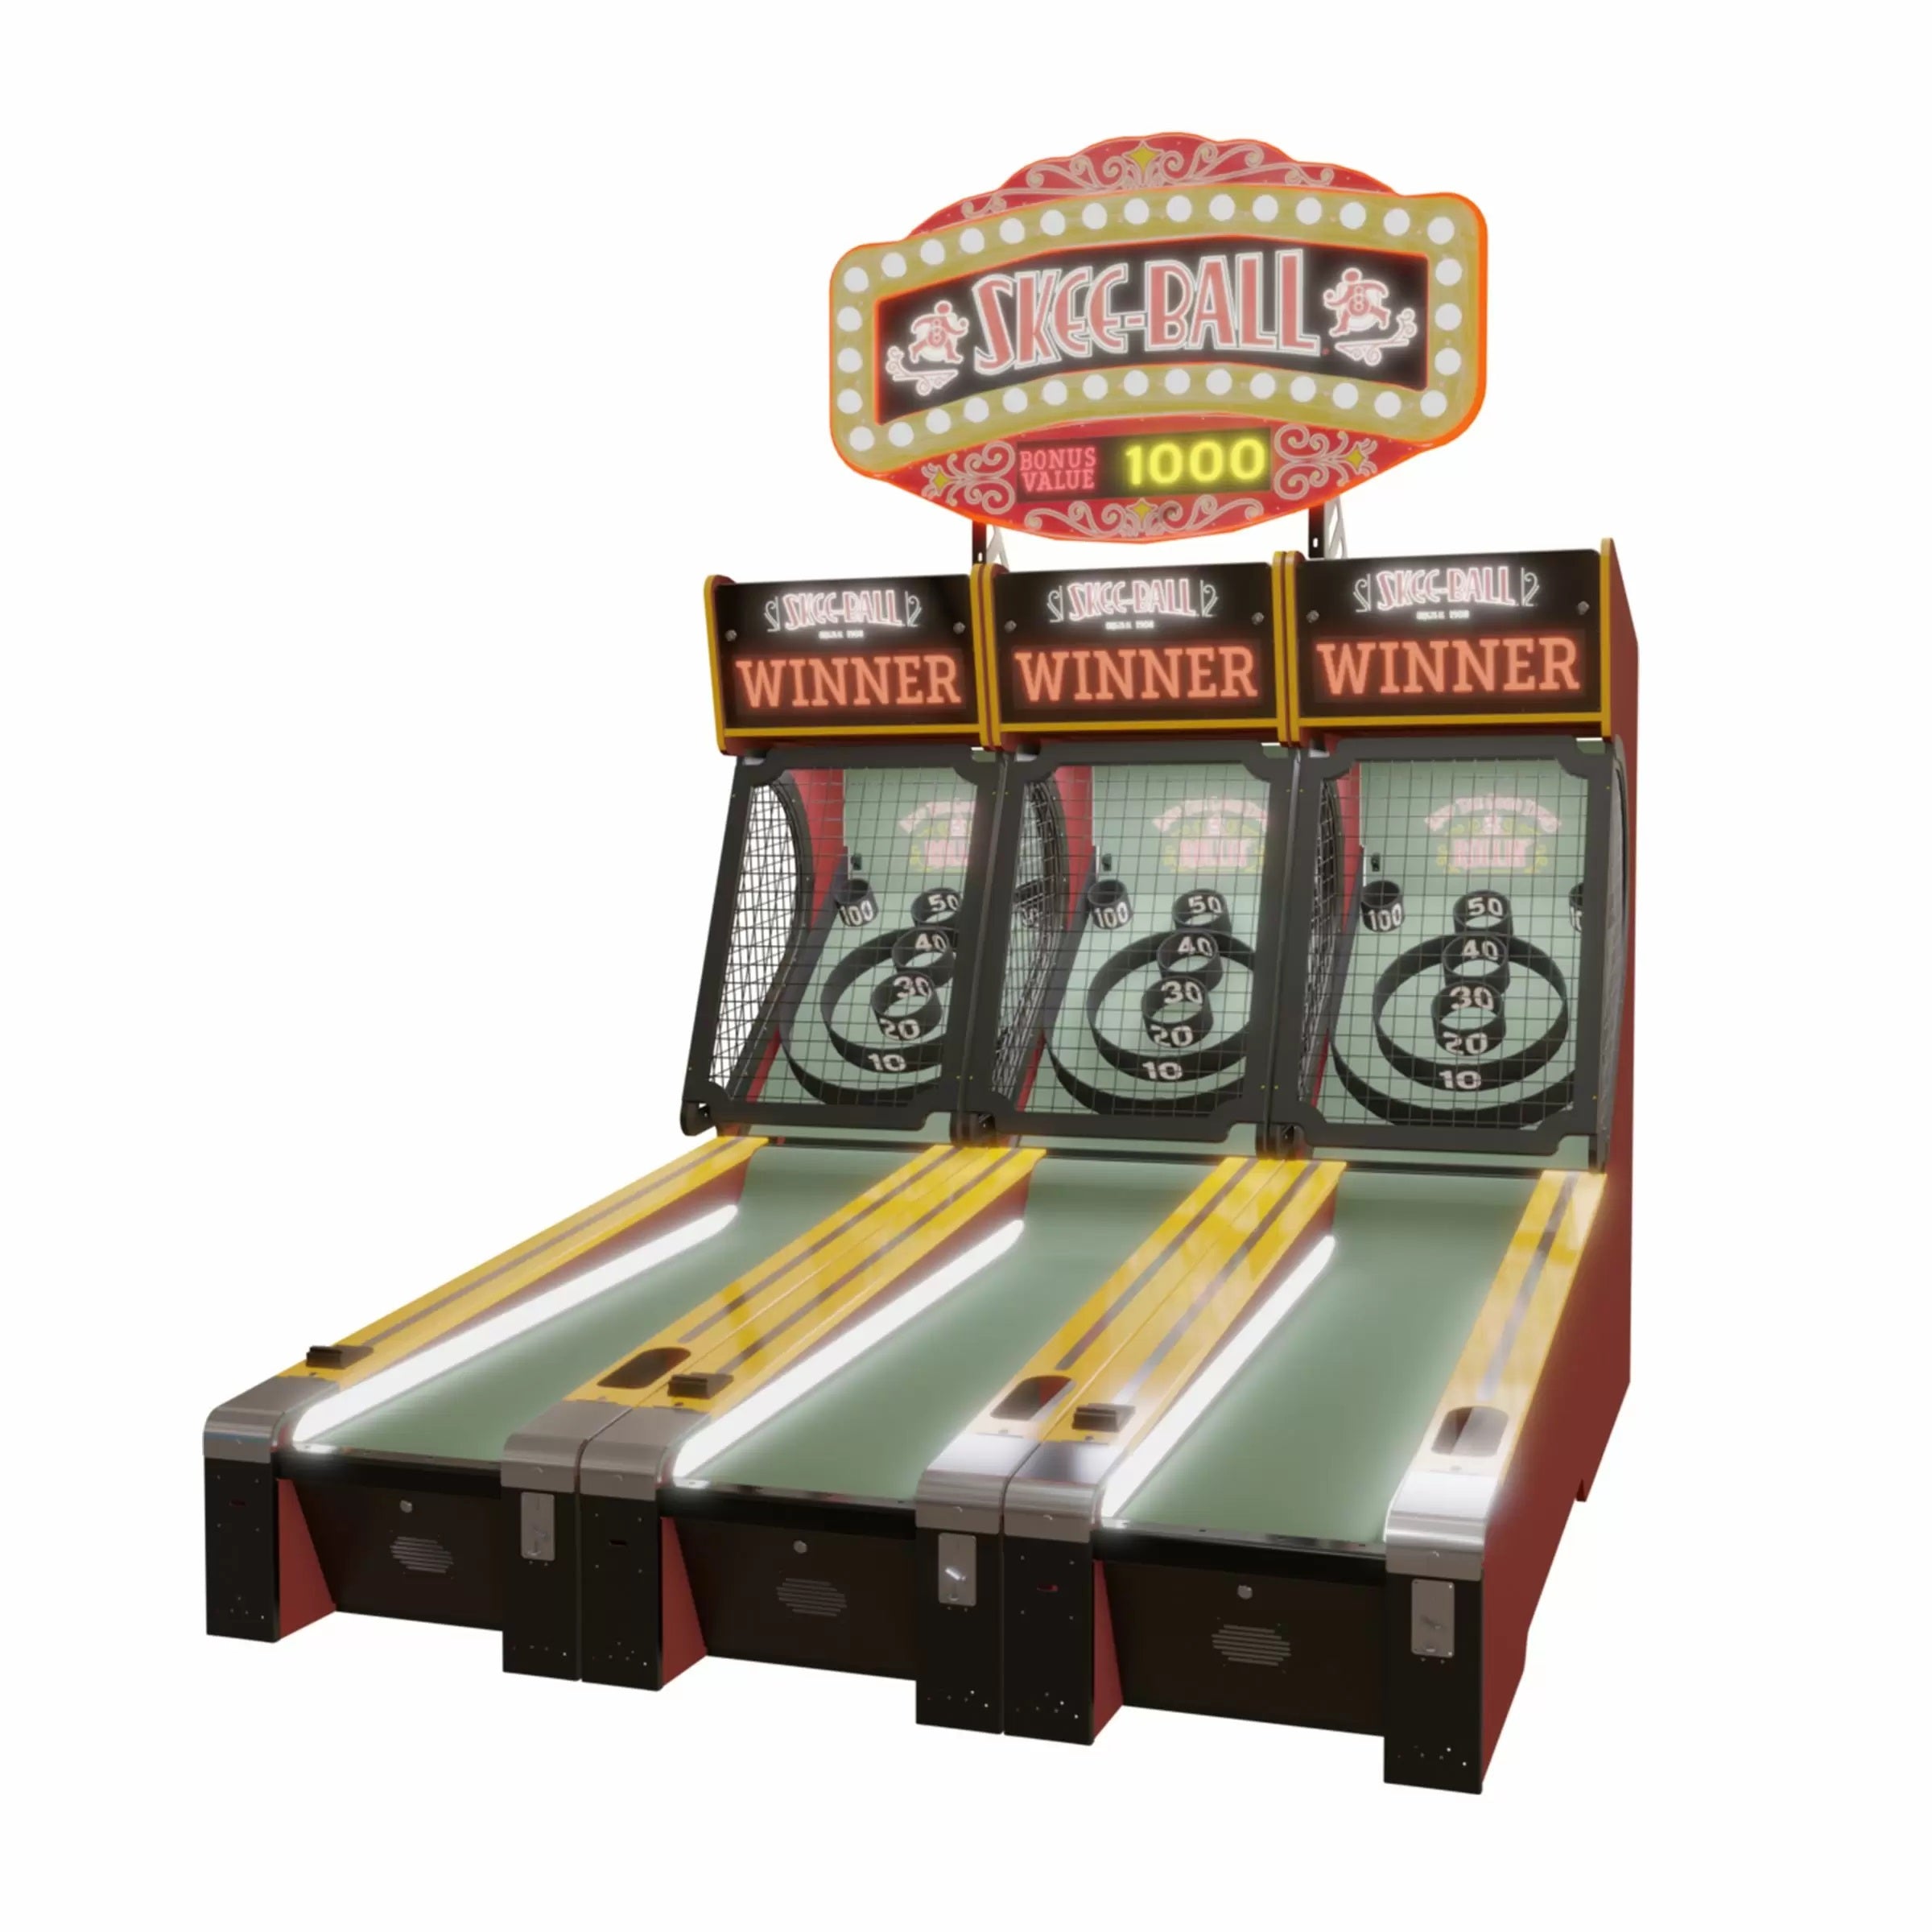 Imperial USA Skee Ball Classic Alley 3pcs